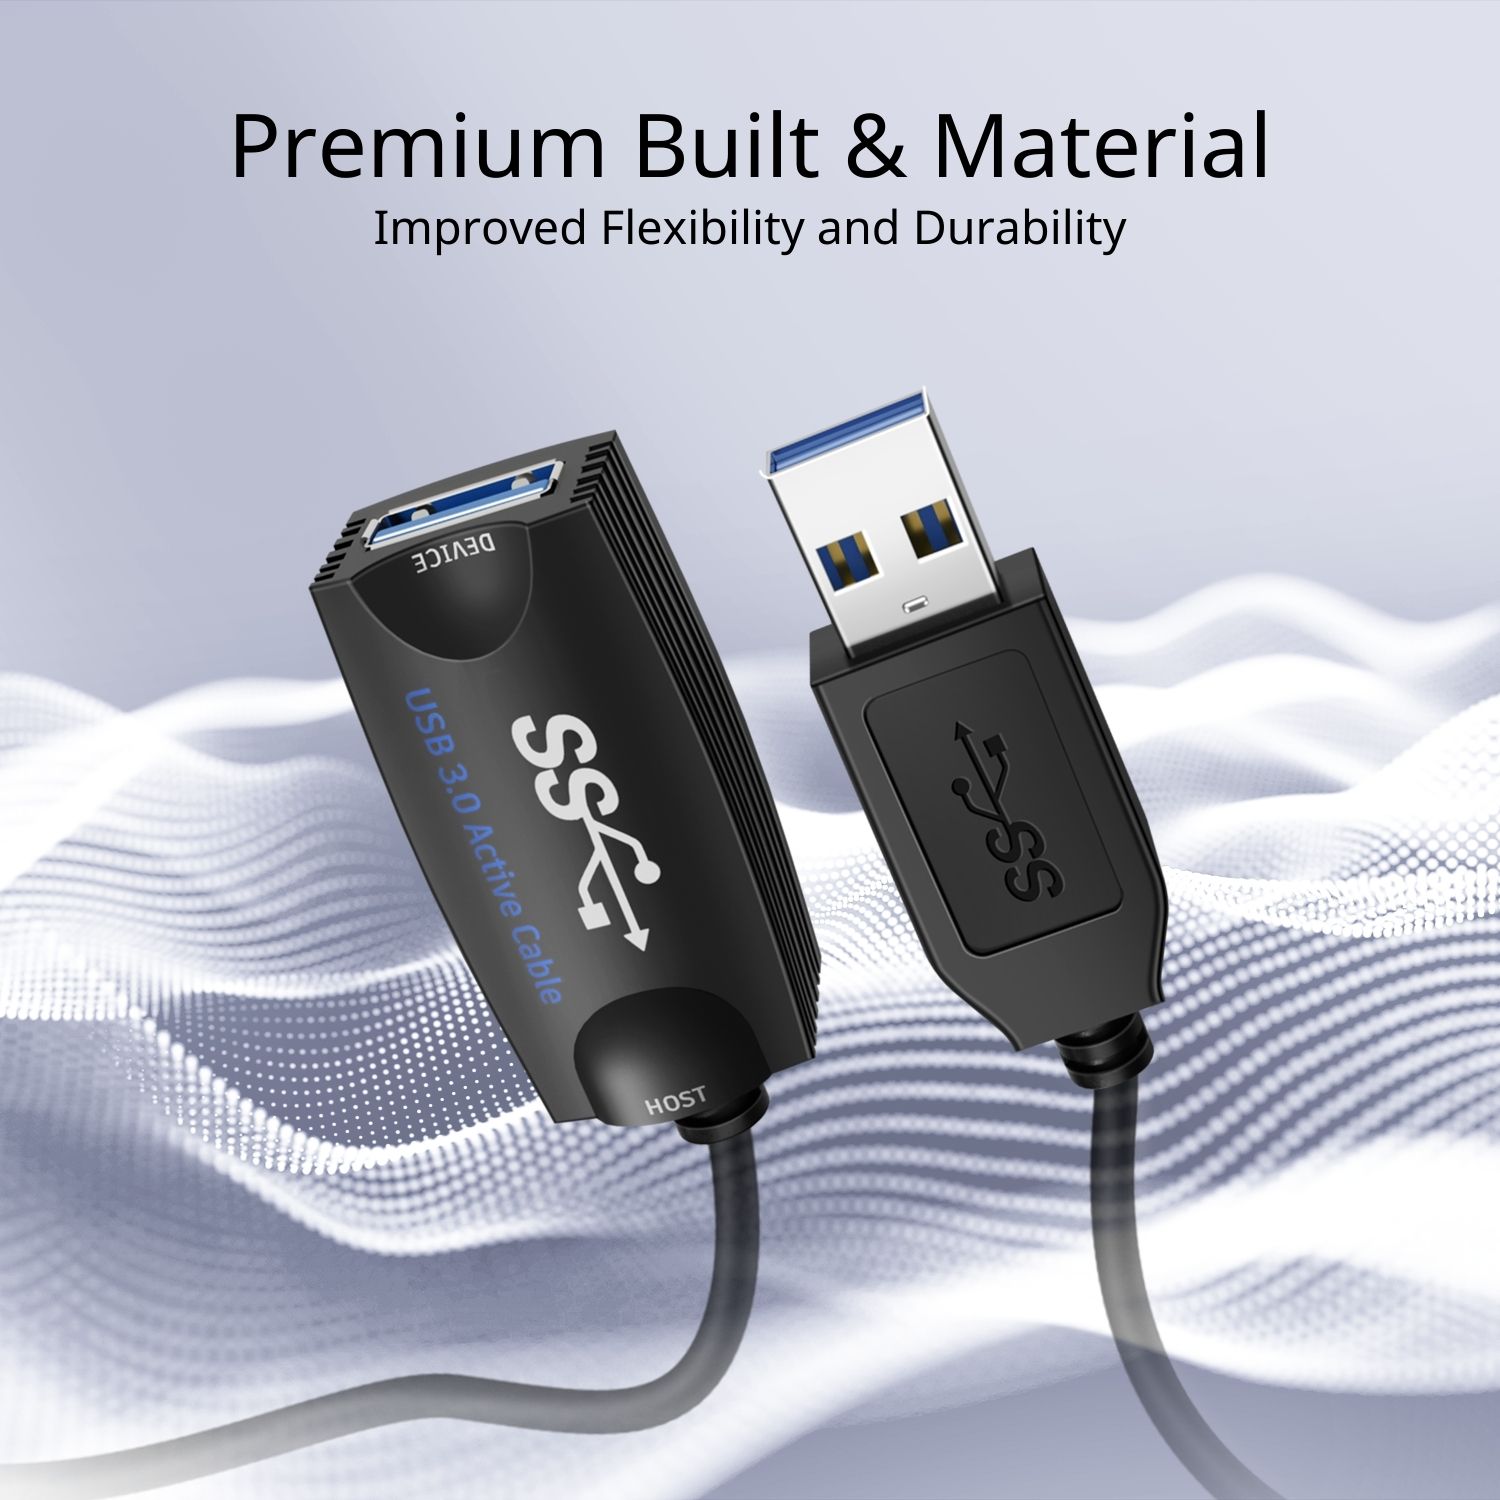 Play and Play - Universal USB compatibility, no driver required, broadly compatible with Windows, macOS, macOS X, Linux, Chromebook OS, and other systems. Connect USB devices such as VR Headset, sensors, external hard drives, printers, scanners, keyboards, mice, etc to your computer